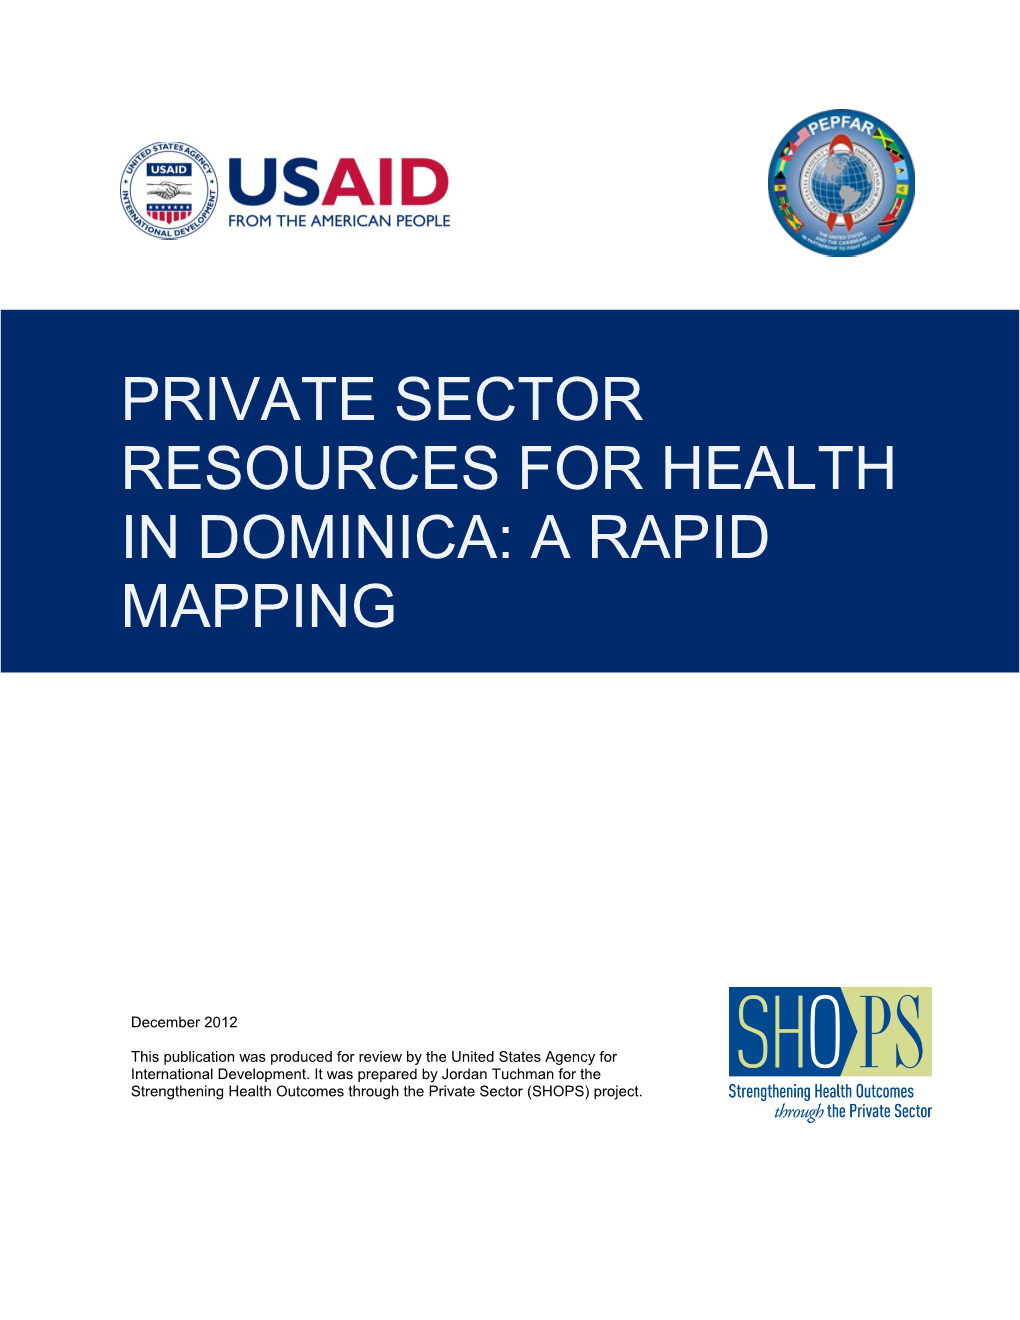 Private Sector Resources for Health in Dominica: a Rapid Mapping